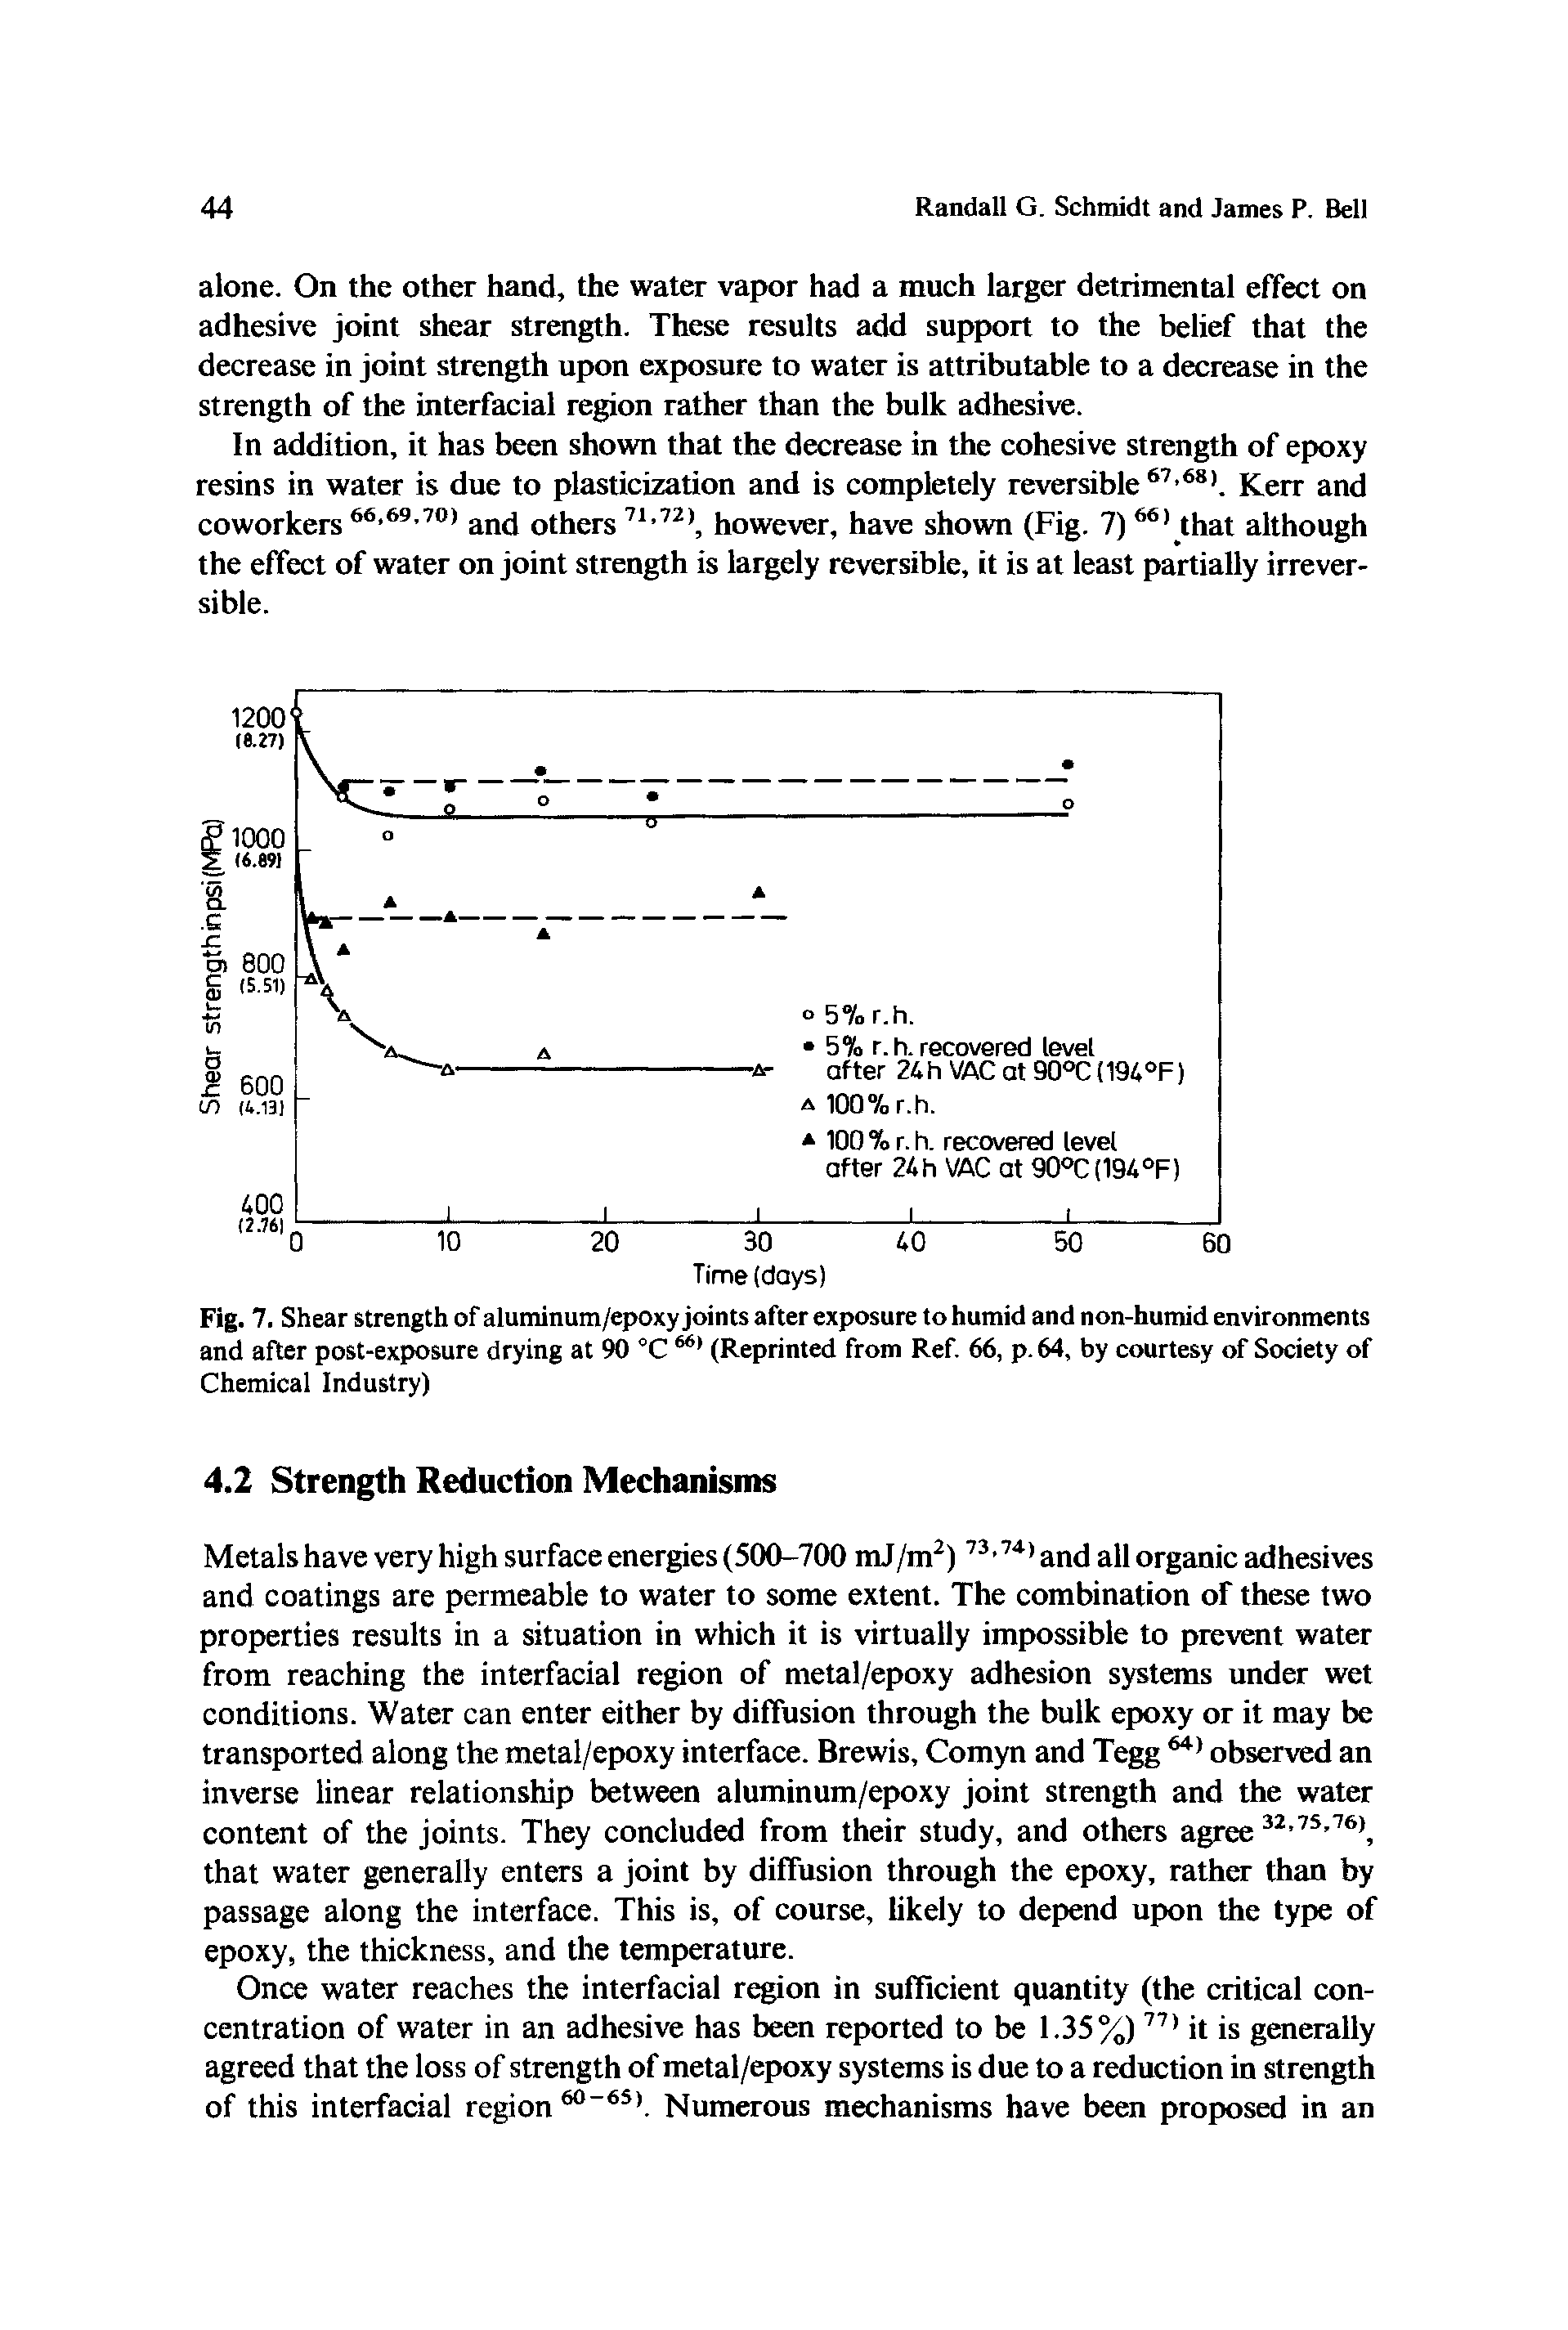 Fig. 7. Shear strength of aluminum/epoxy joints after exposure to humid and non-humid environments and after post-exposure drying at 90 °C 661 (Reprinted from Ref. 66, p.64, by courtesy of Society of Chemical Industry)...